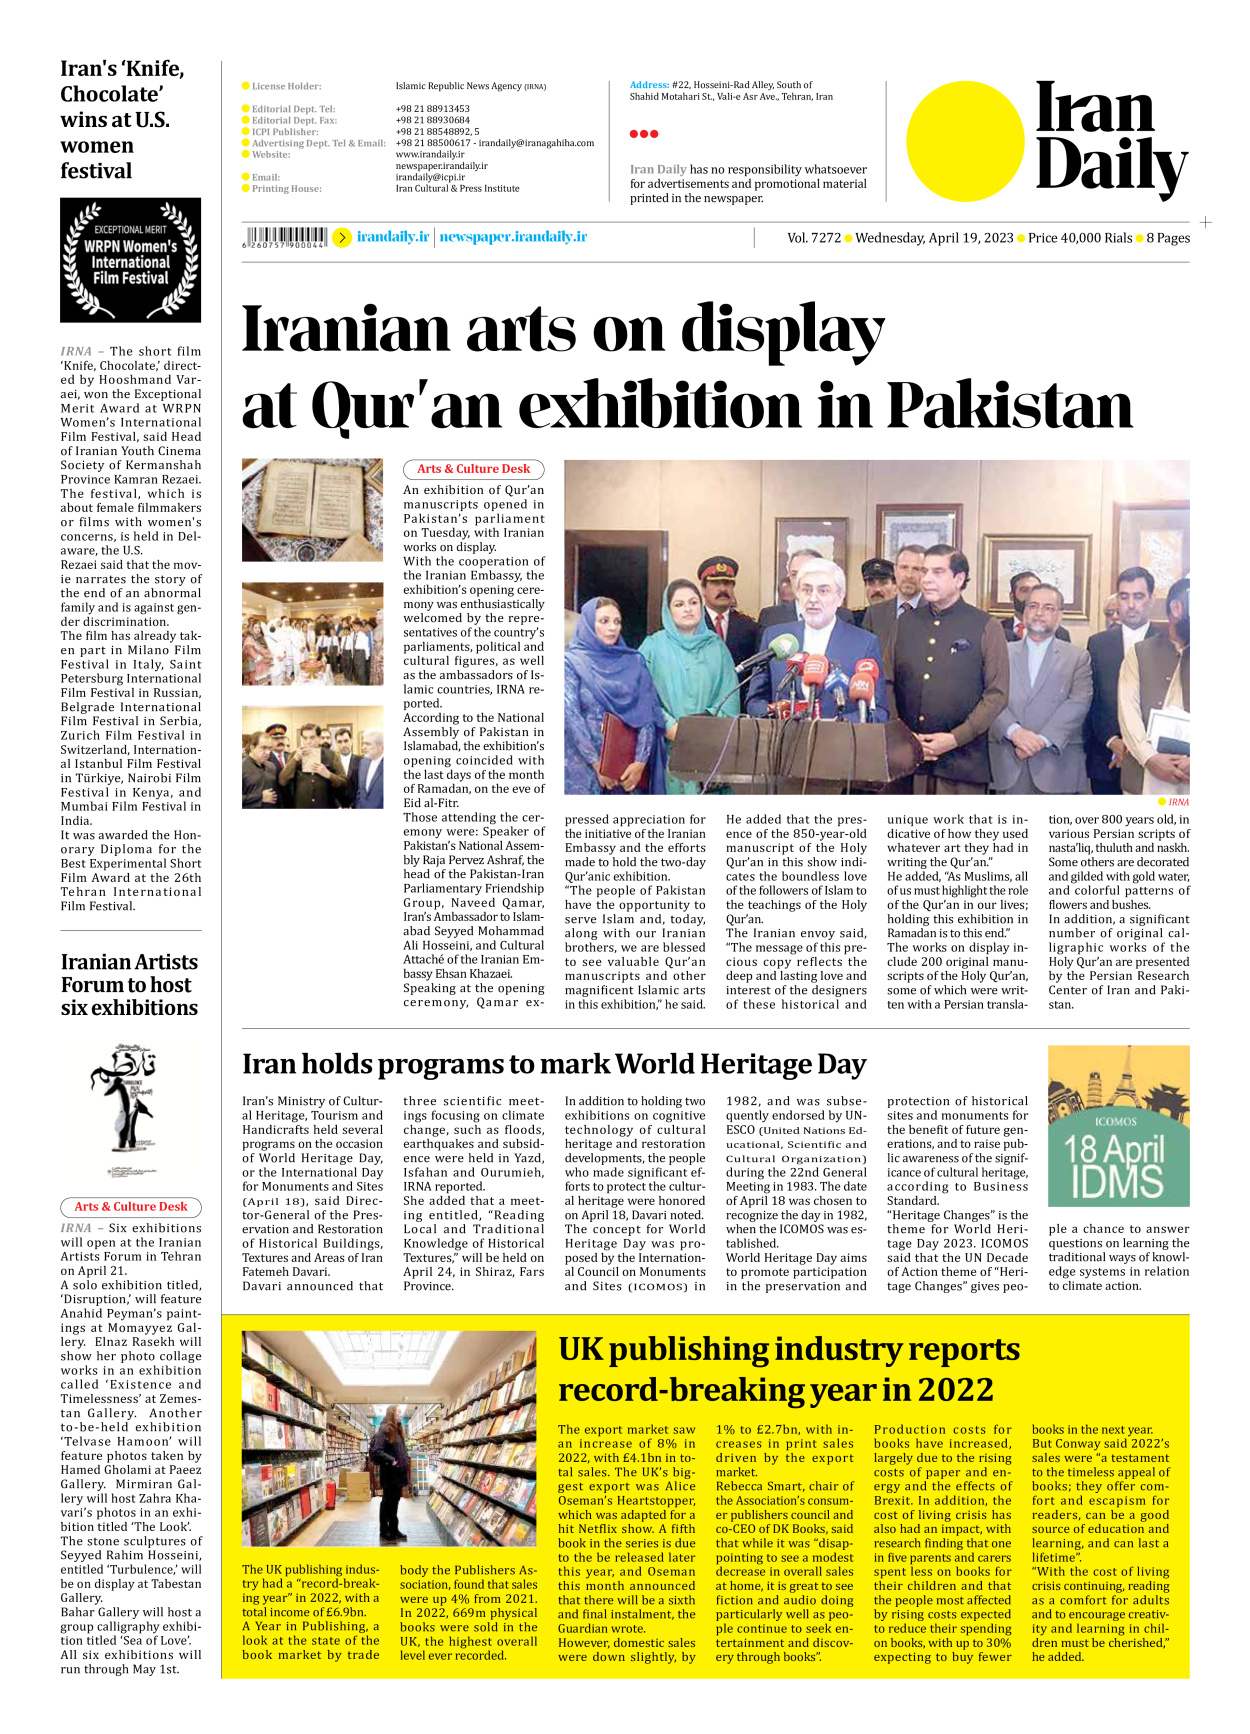 Iran Daily - Number Seven Thousand Two Hundred and Seventy Two - 19 April 2023 - Page 8